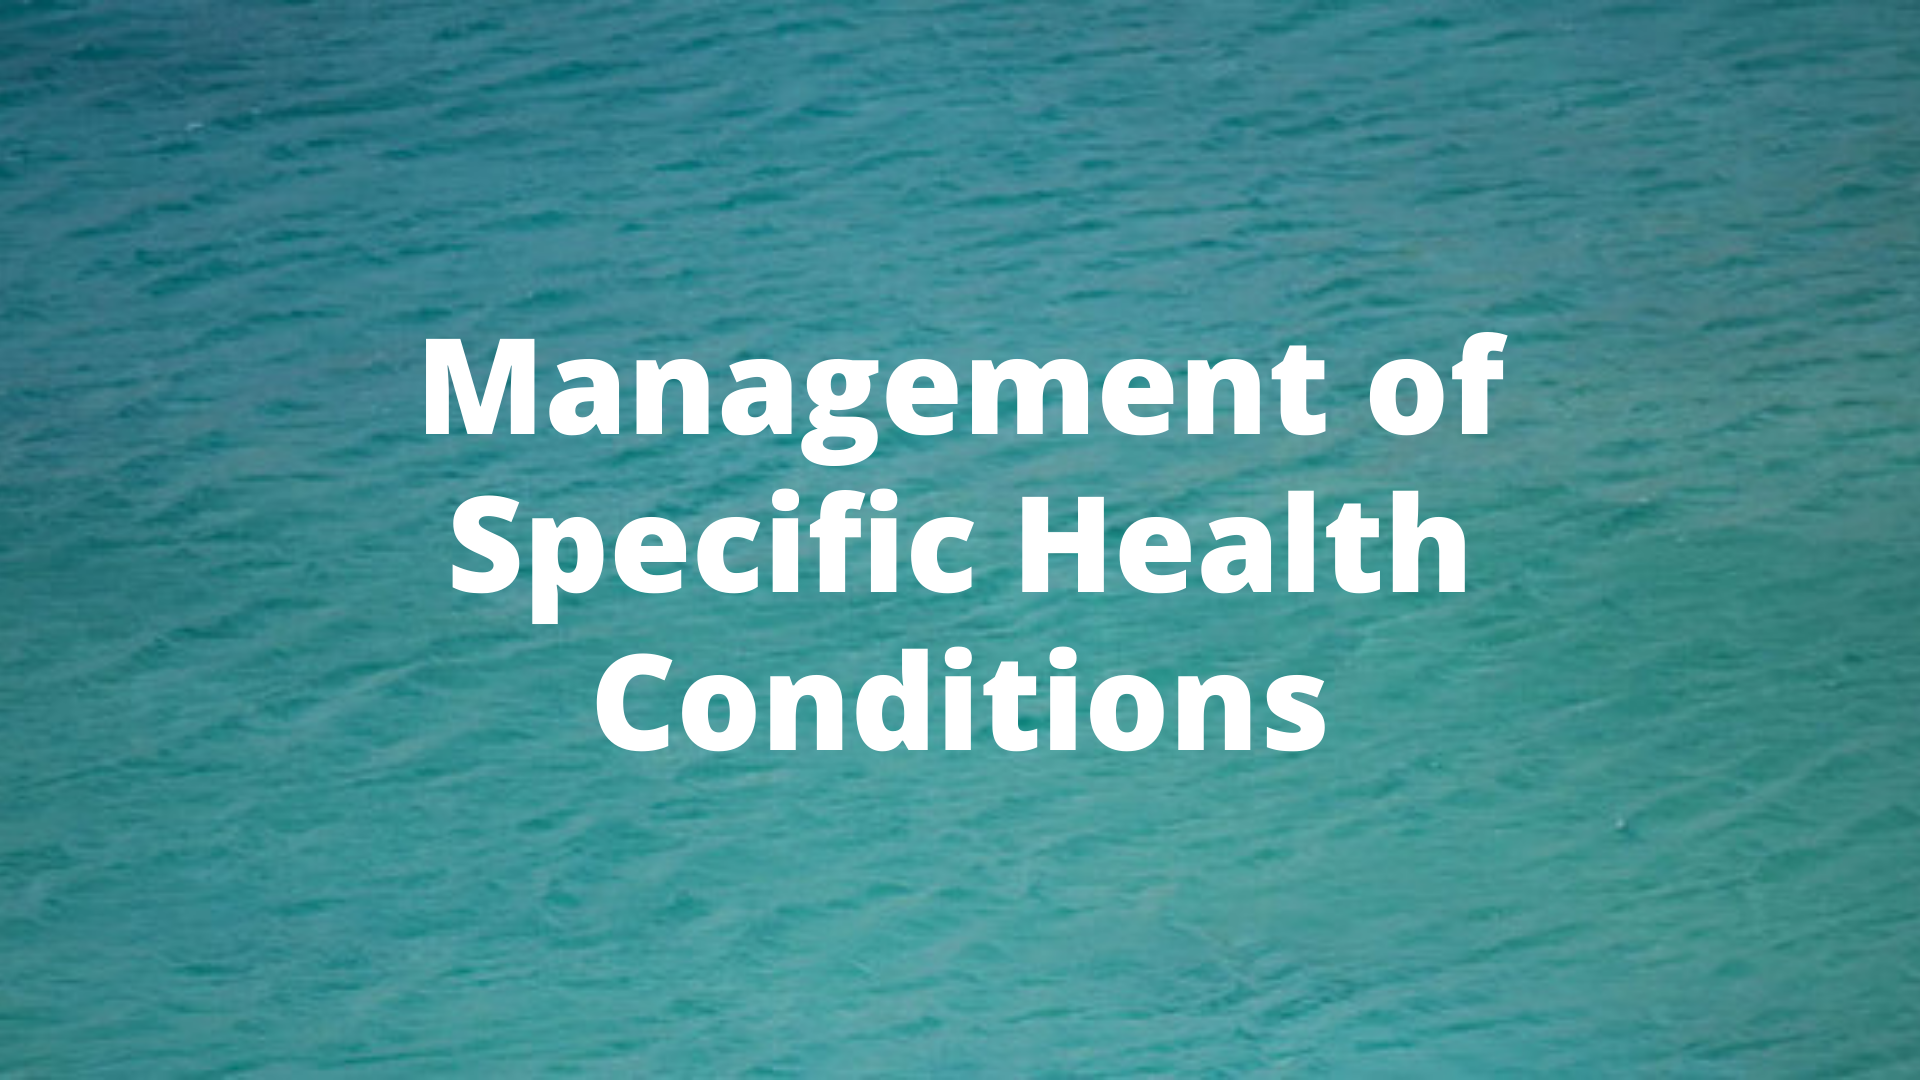 Management of Specific Health Conditions